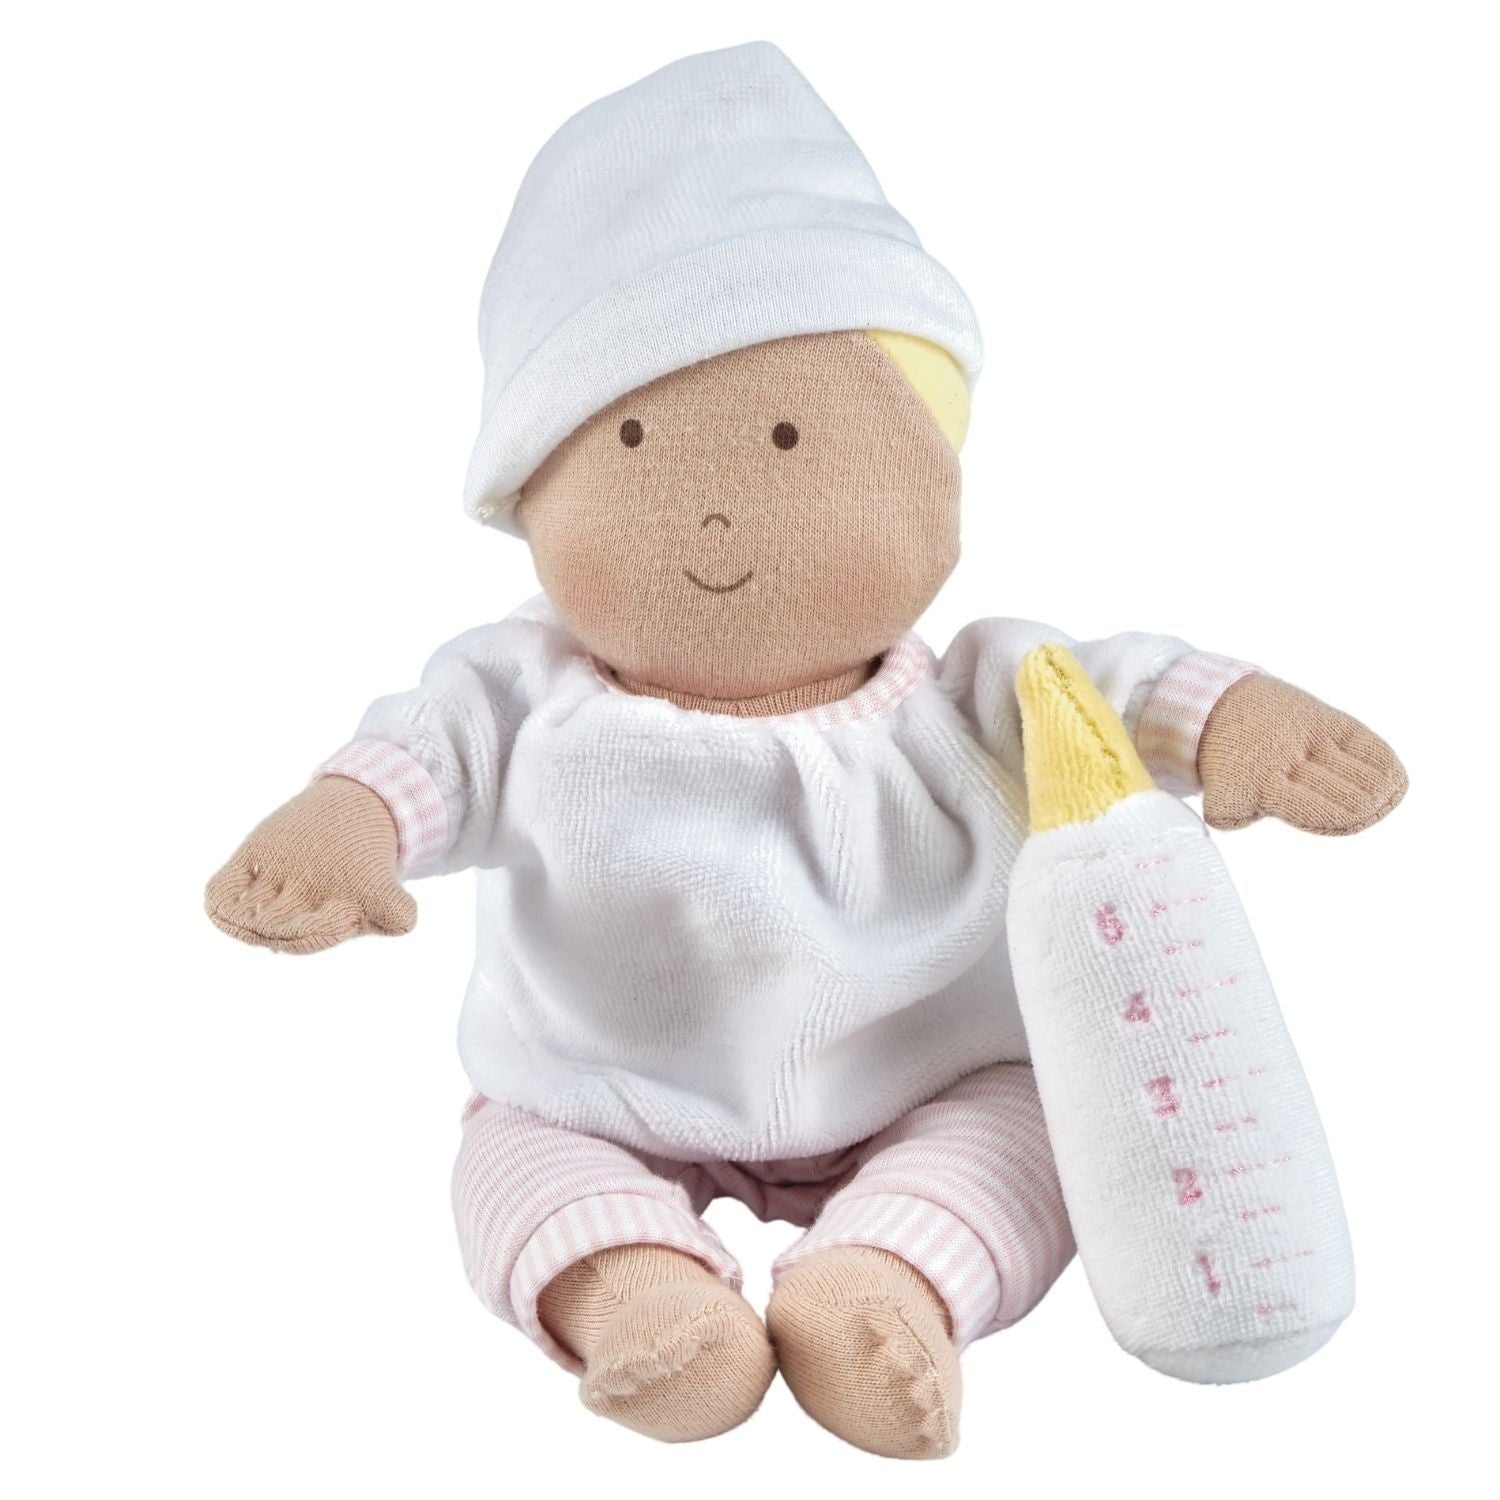 Grace Baby Soft Doll with Carrycot, Bottle & Blanket - Twinkle Twinkle Little One